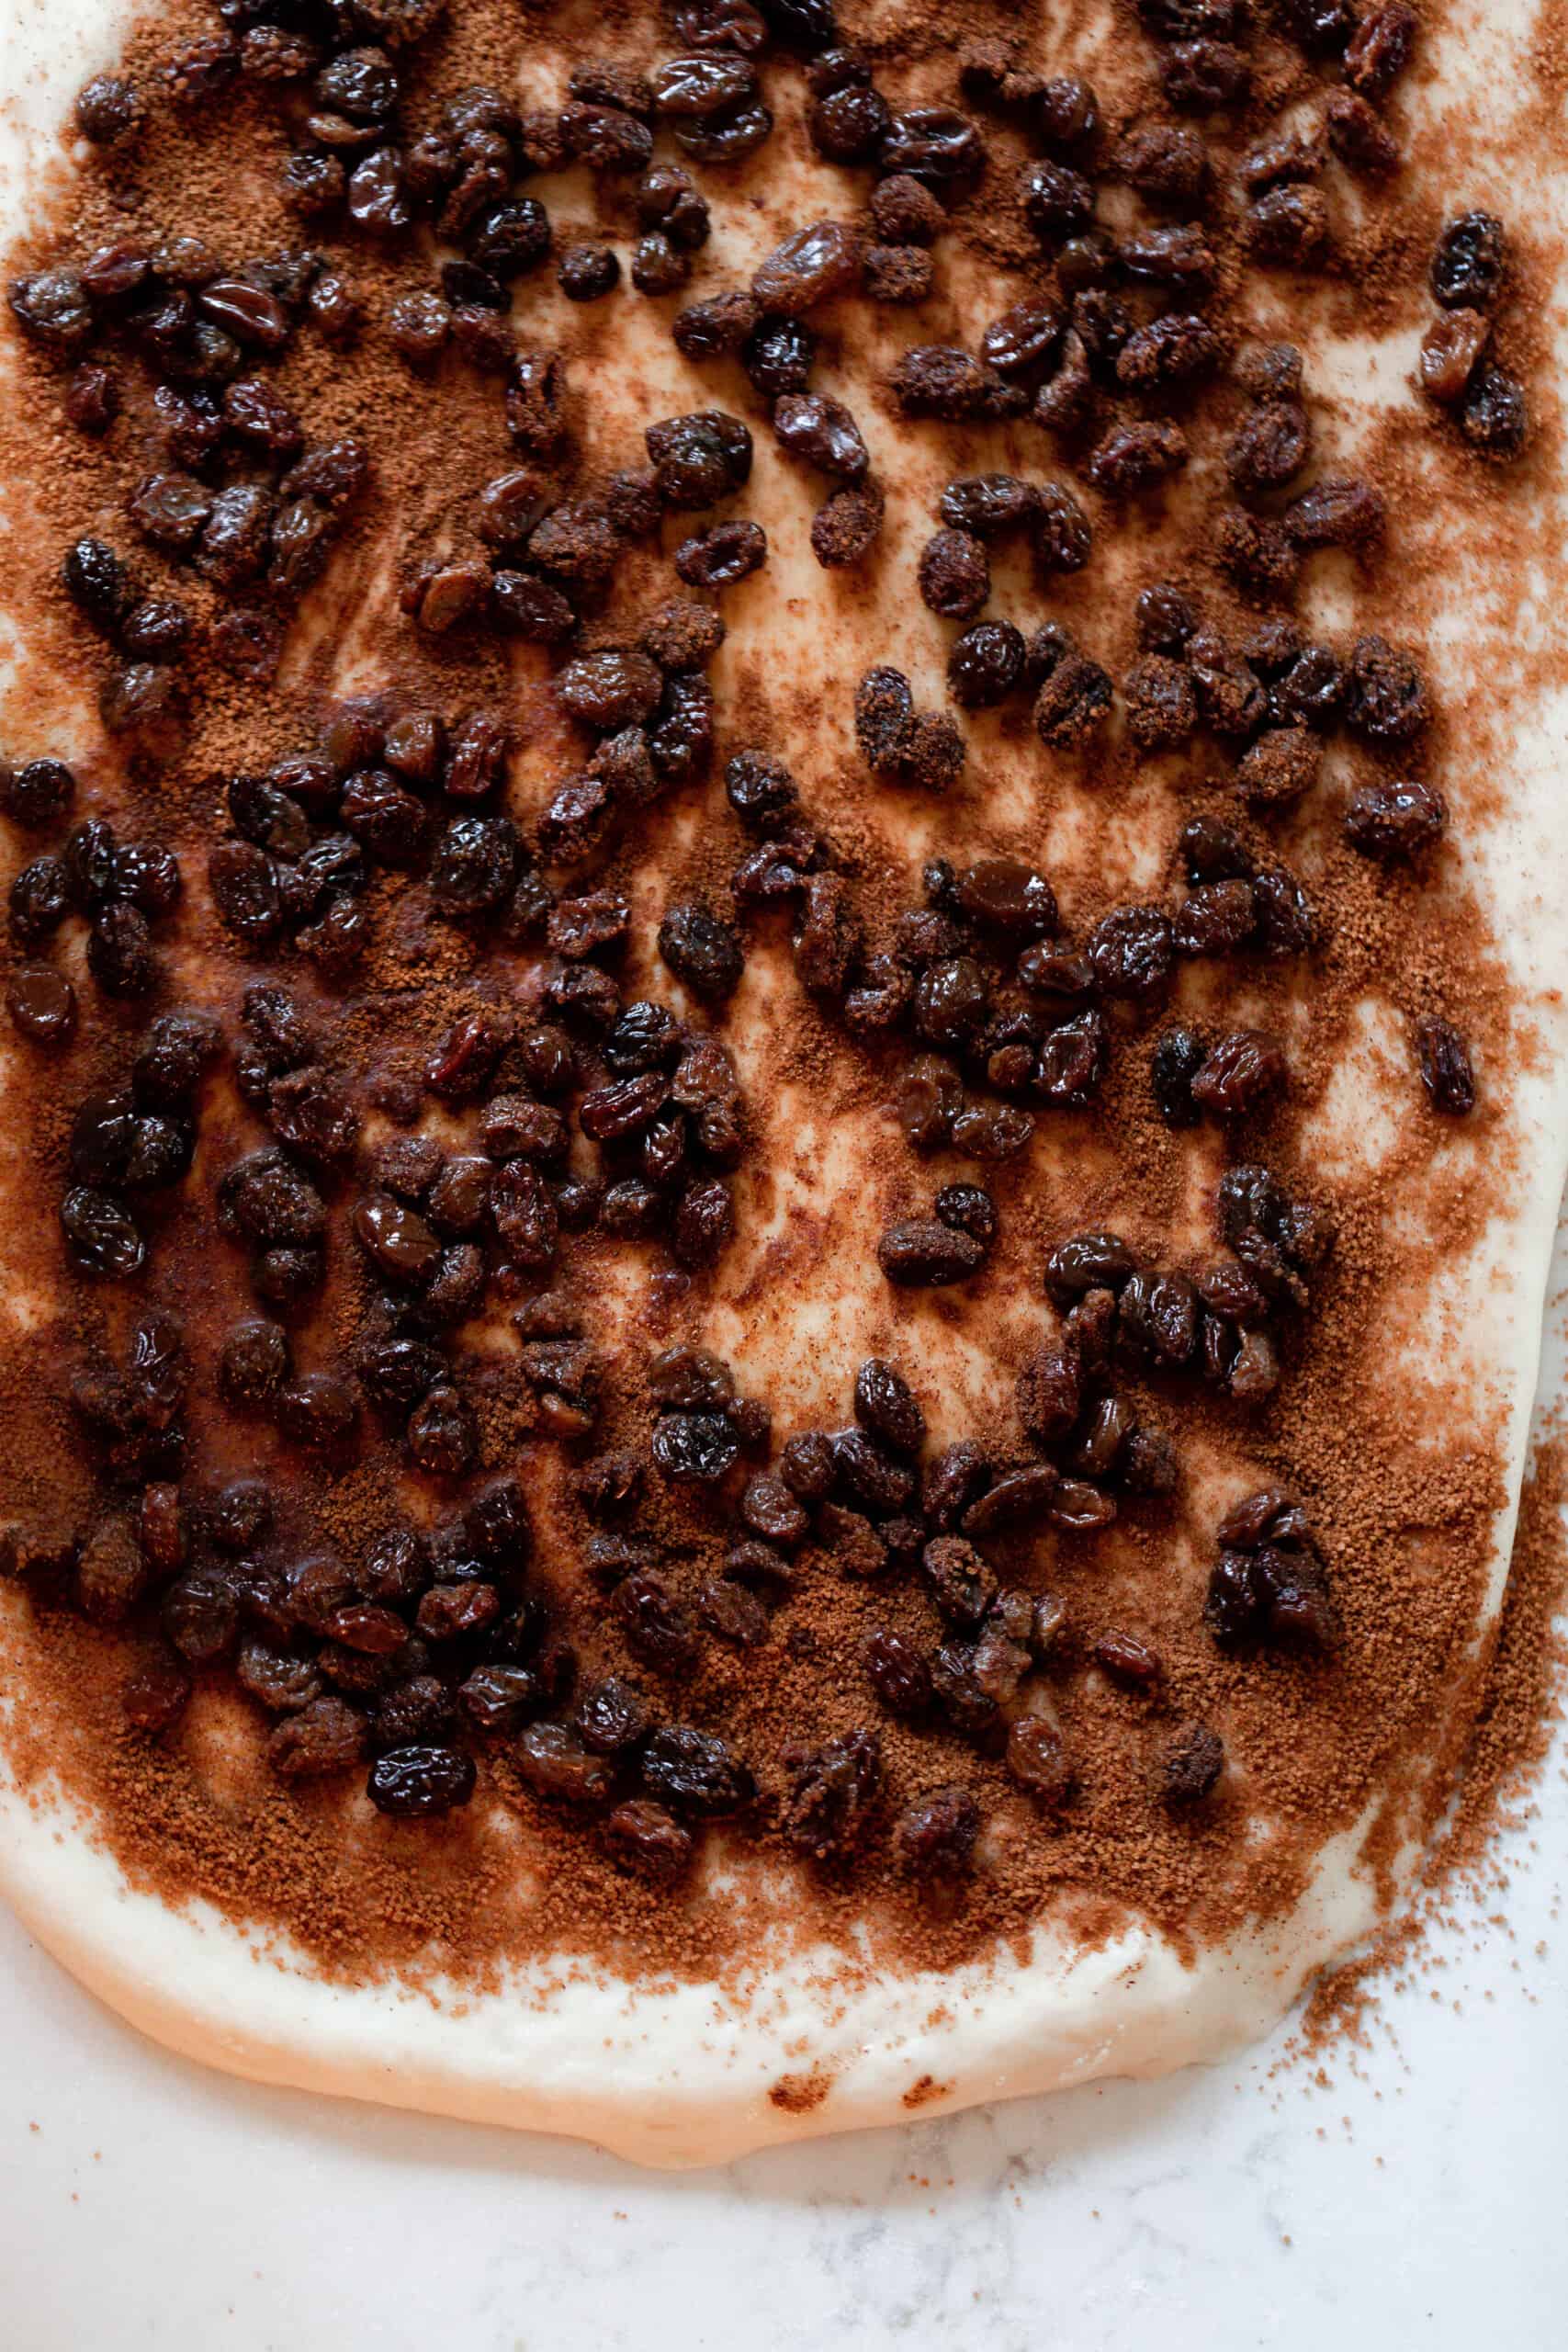 cinnamon, sugar, and raisins spread out onto sourdough dough rolled in rectangle shape